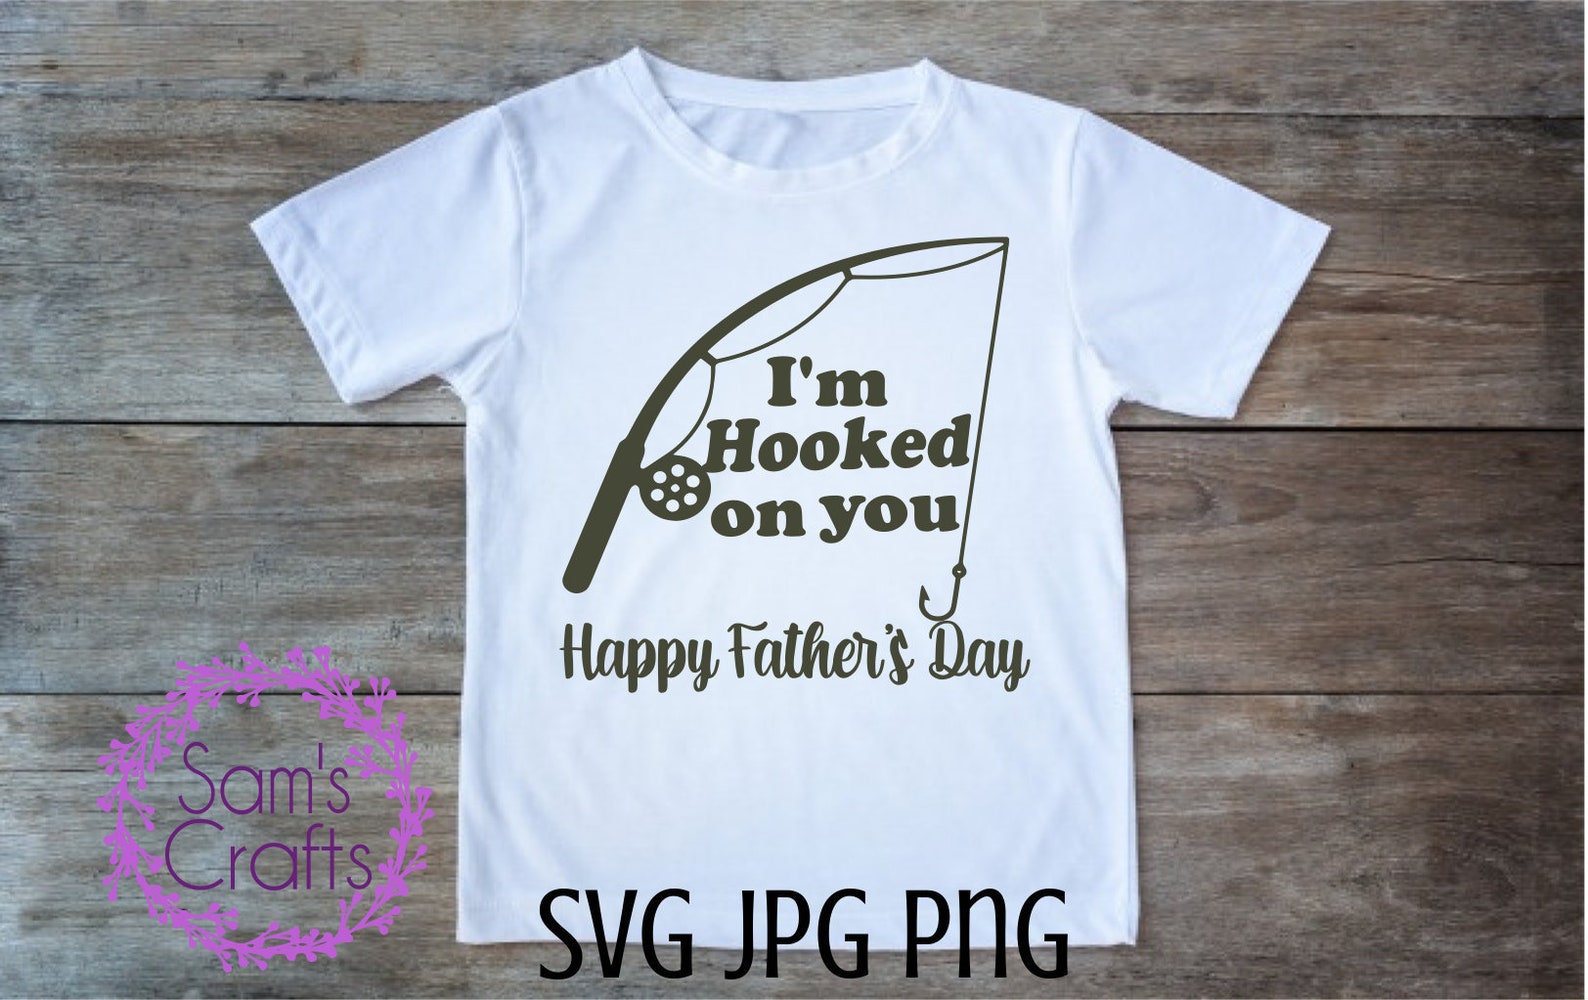 Im hooked on you SVG png jpg Father's Day Gifts Fishing | Etsy